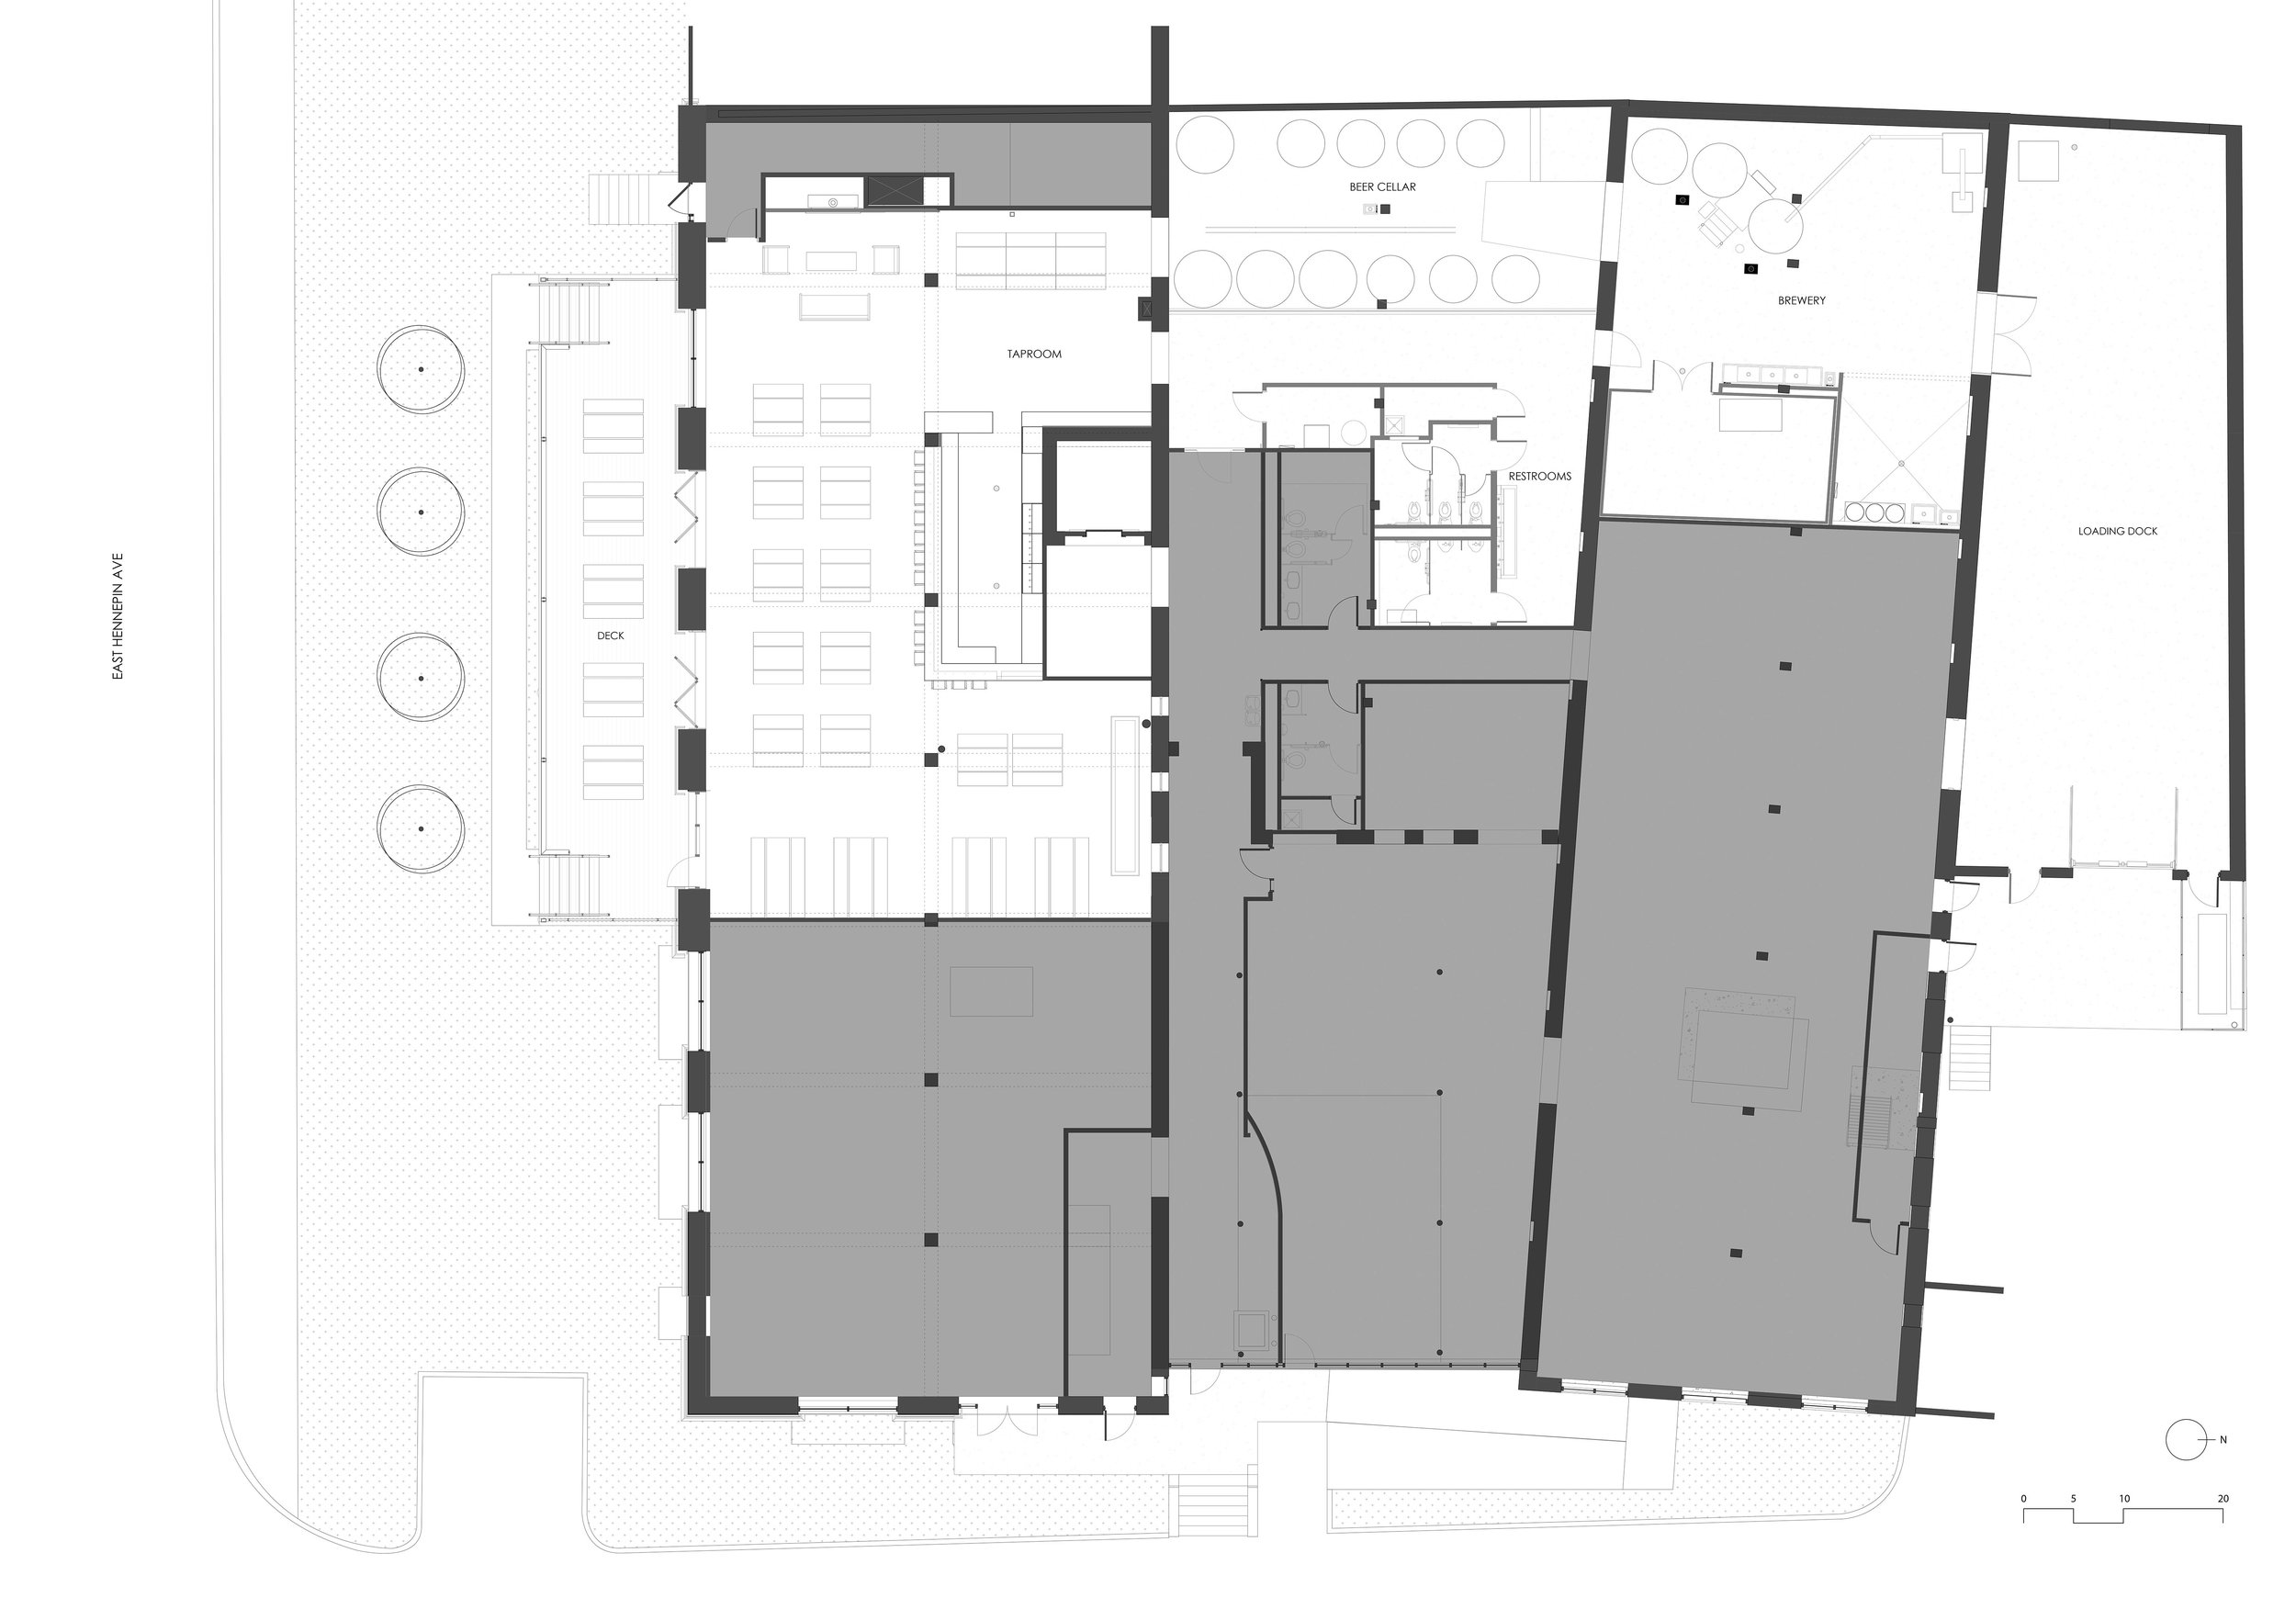 Building plan of existing context and remodeled brewery spaces of Headflyer Brewing in Minneapolis.